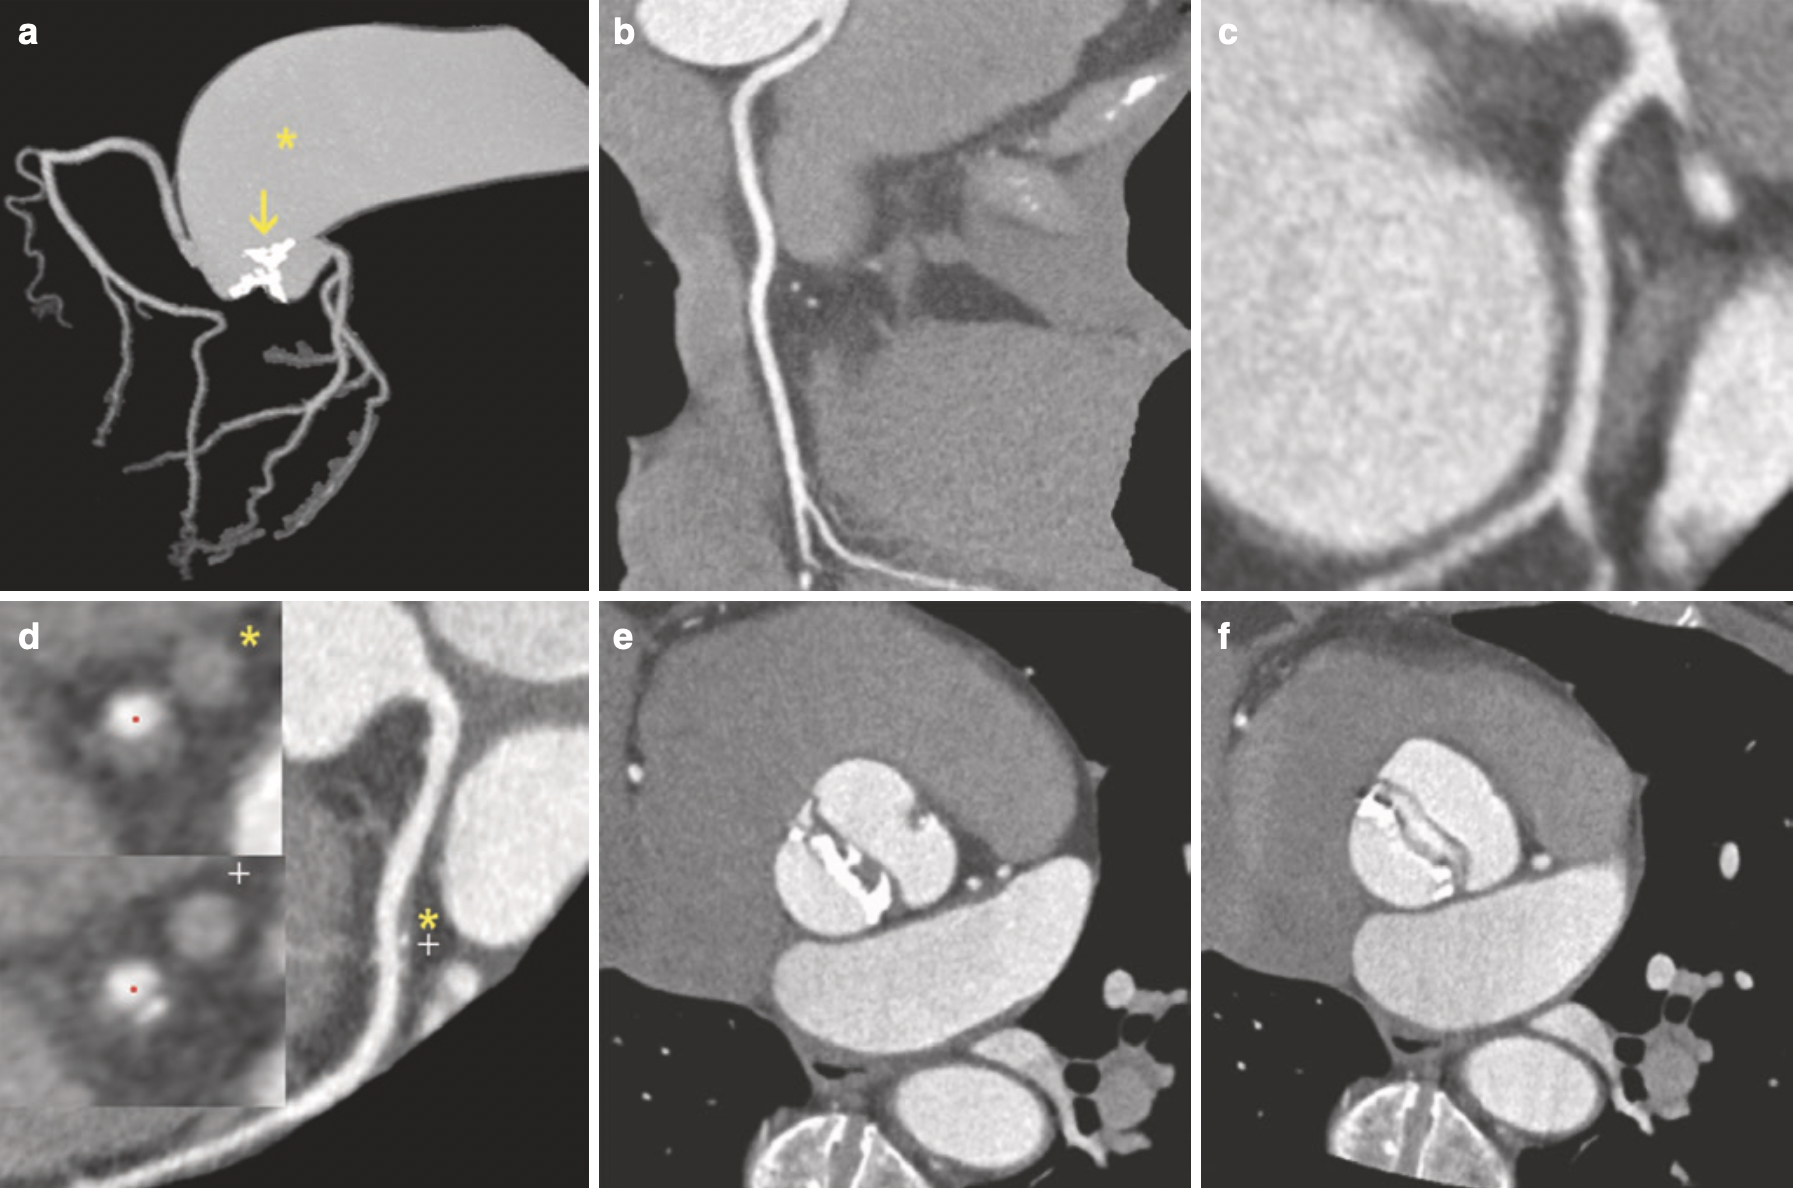 Bicuspid AV with aortic dilation, and non-obstructive mixed plaque with evidence of positive remodeling`